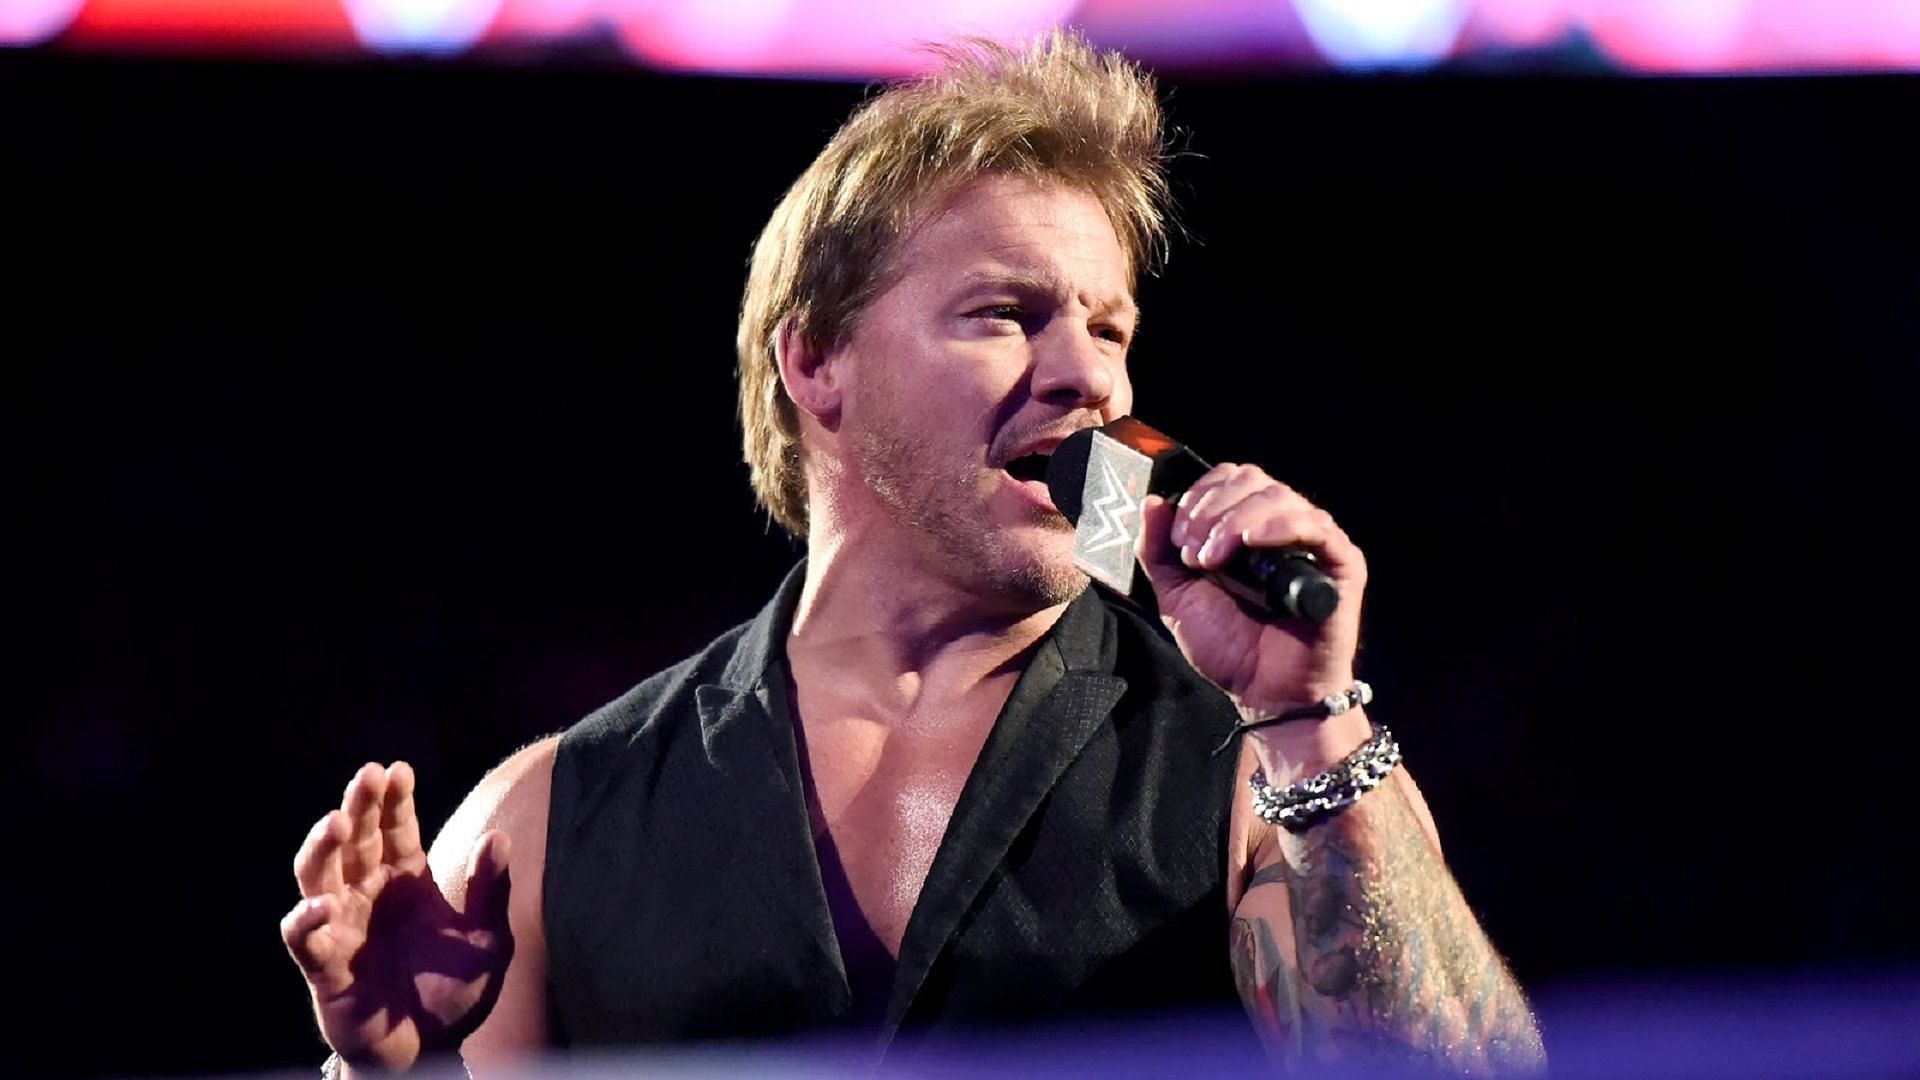 Will WWE fans ever get the &quot;Gift of Jericho&quot; again?